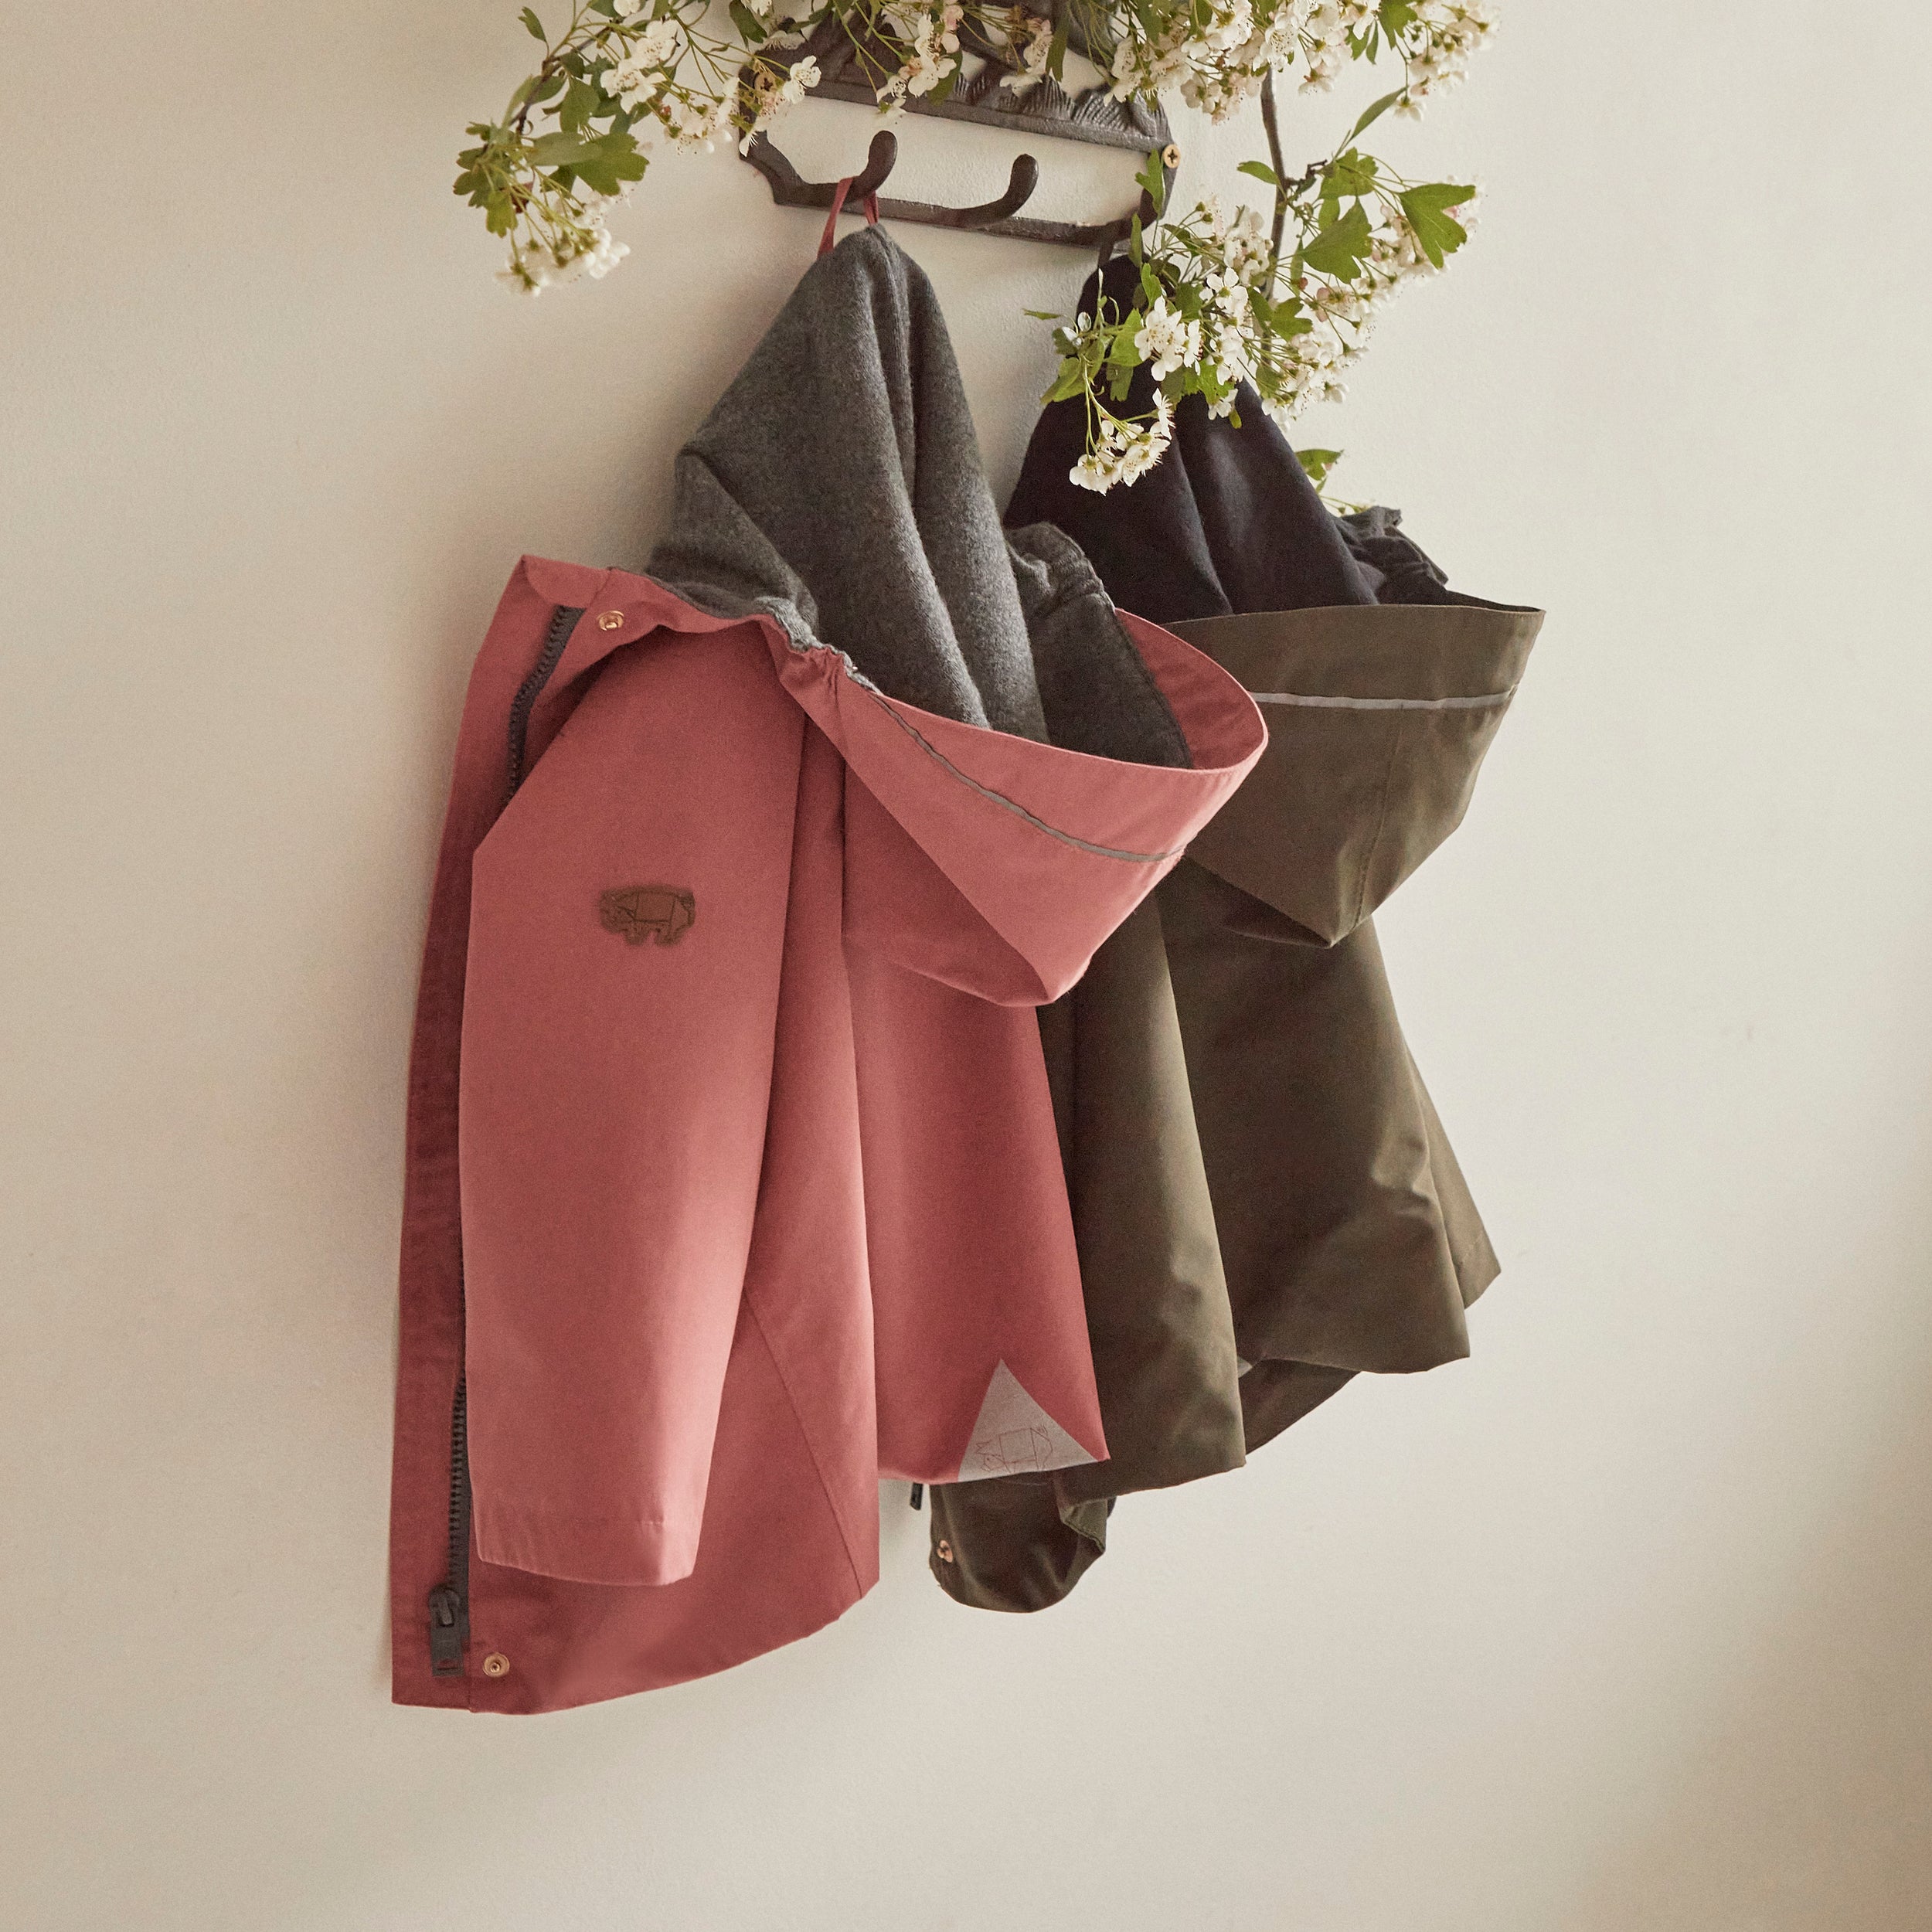 SEEKING SUSTAINABILITY | WHAT MAKES OUR RAINWEAR SO SPECIAL?